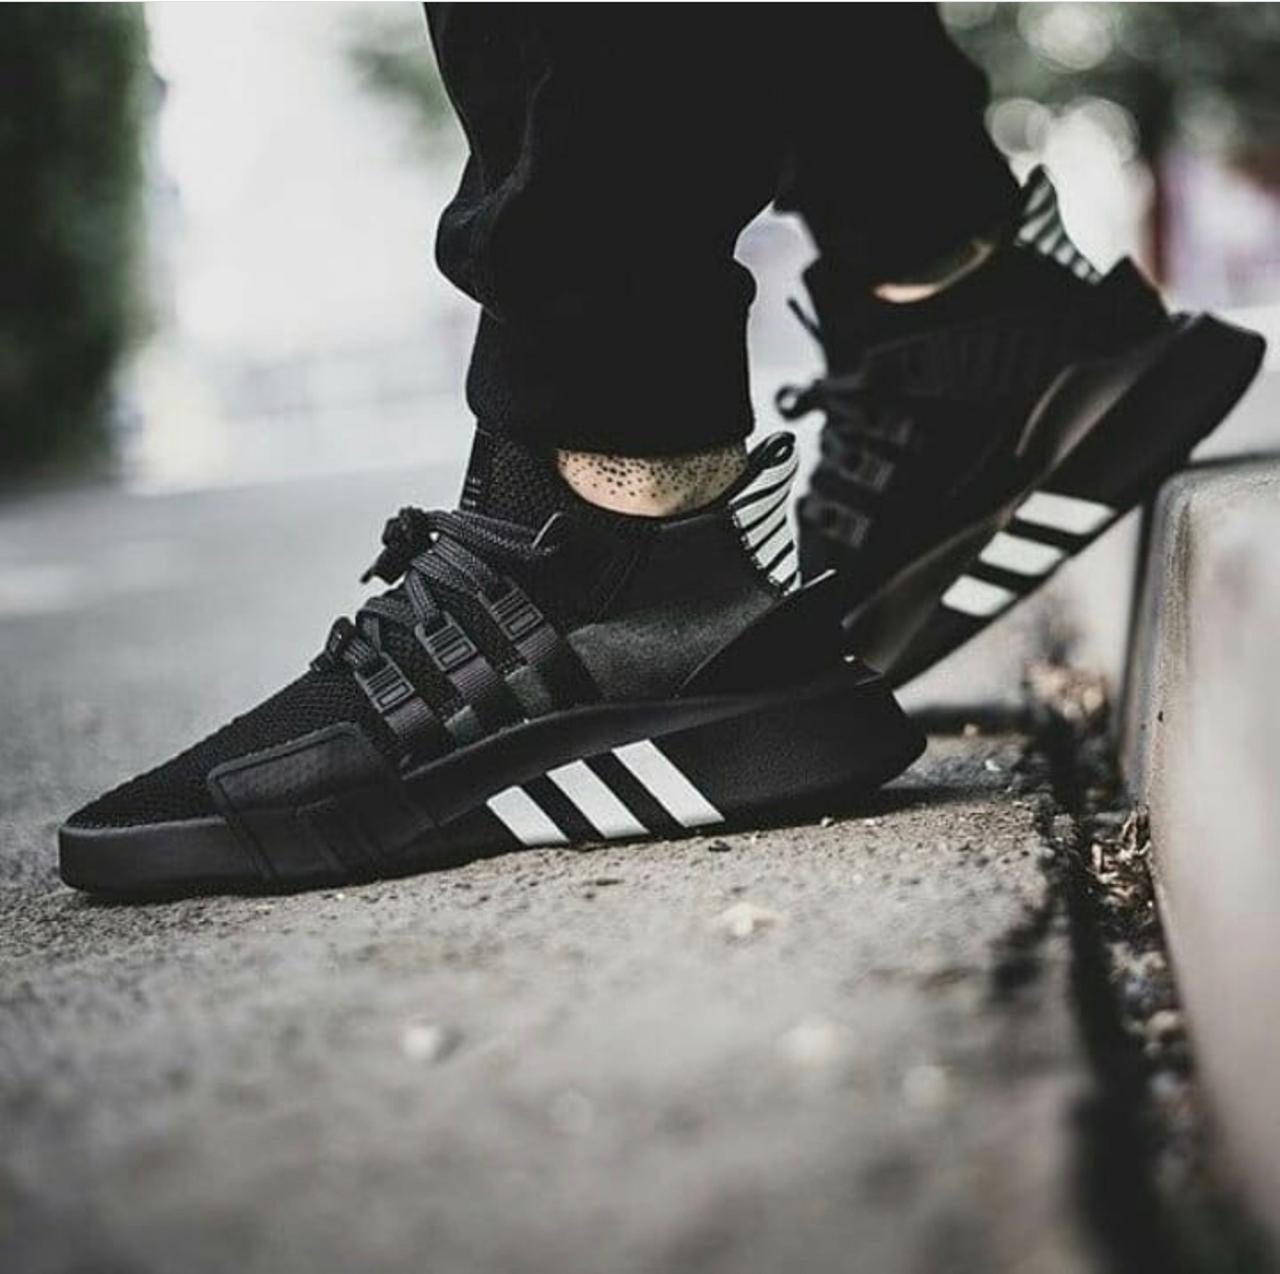 Adidas EQT Bask Shoes For Running On Sale